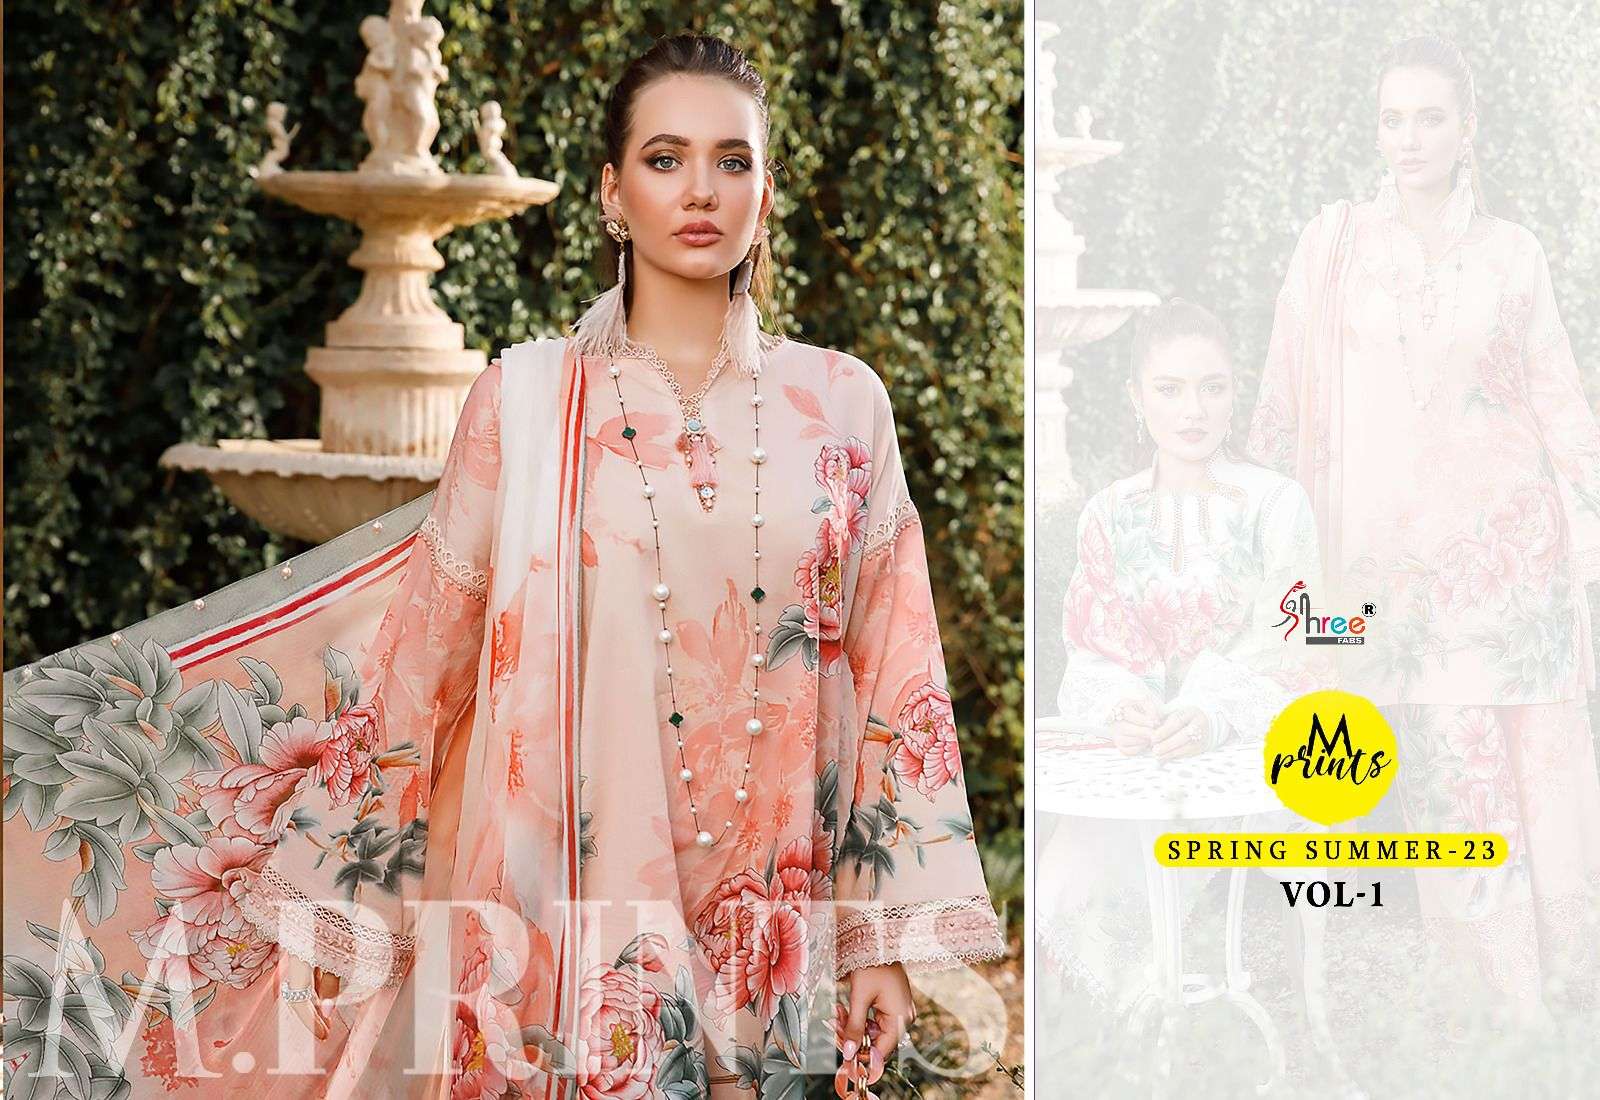 SHREE FAB M PRINT SPRING SUMMER-23 VOL 1 DESIGNER COTTON PRINT WITH EMBROIDERY PATCH WORK SUITS IN BEST WHOLESALE RATE